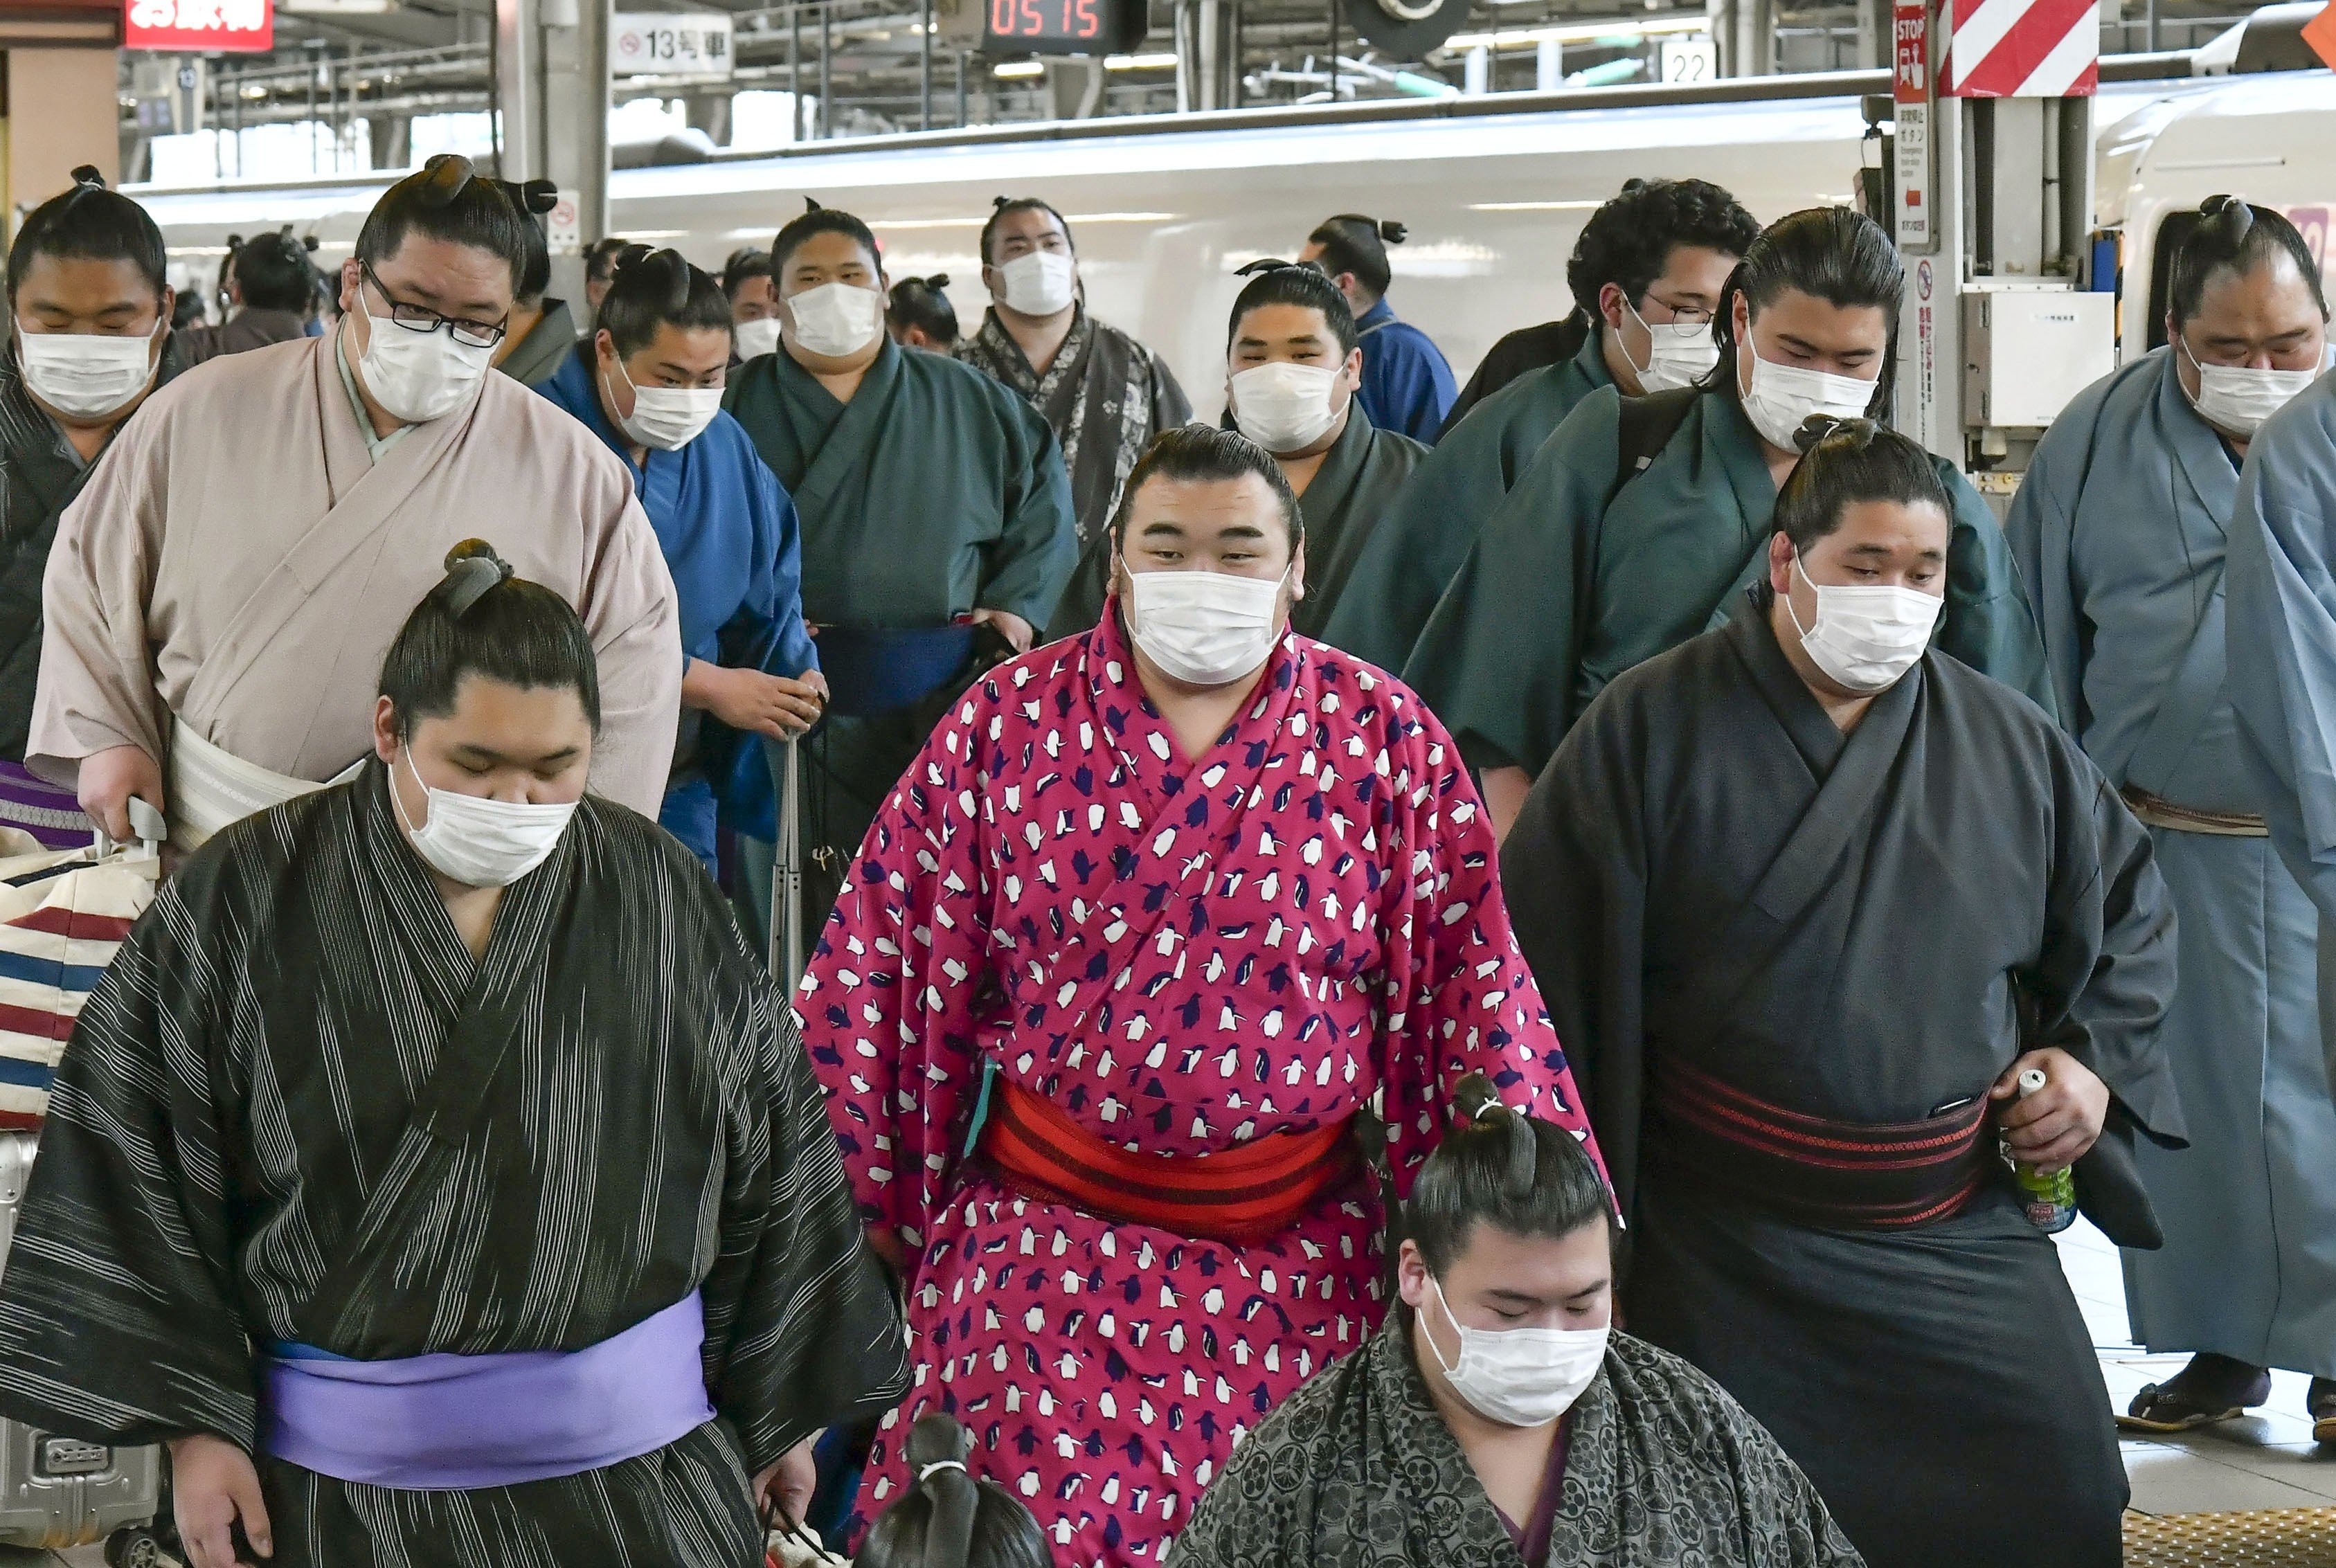 Sumo wrestlers wearing masks arrive at Shin Osaka railway station in Japan on February 23, as Japan grapples with the coronavirus outbreak. Photo: Kyodo News